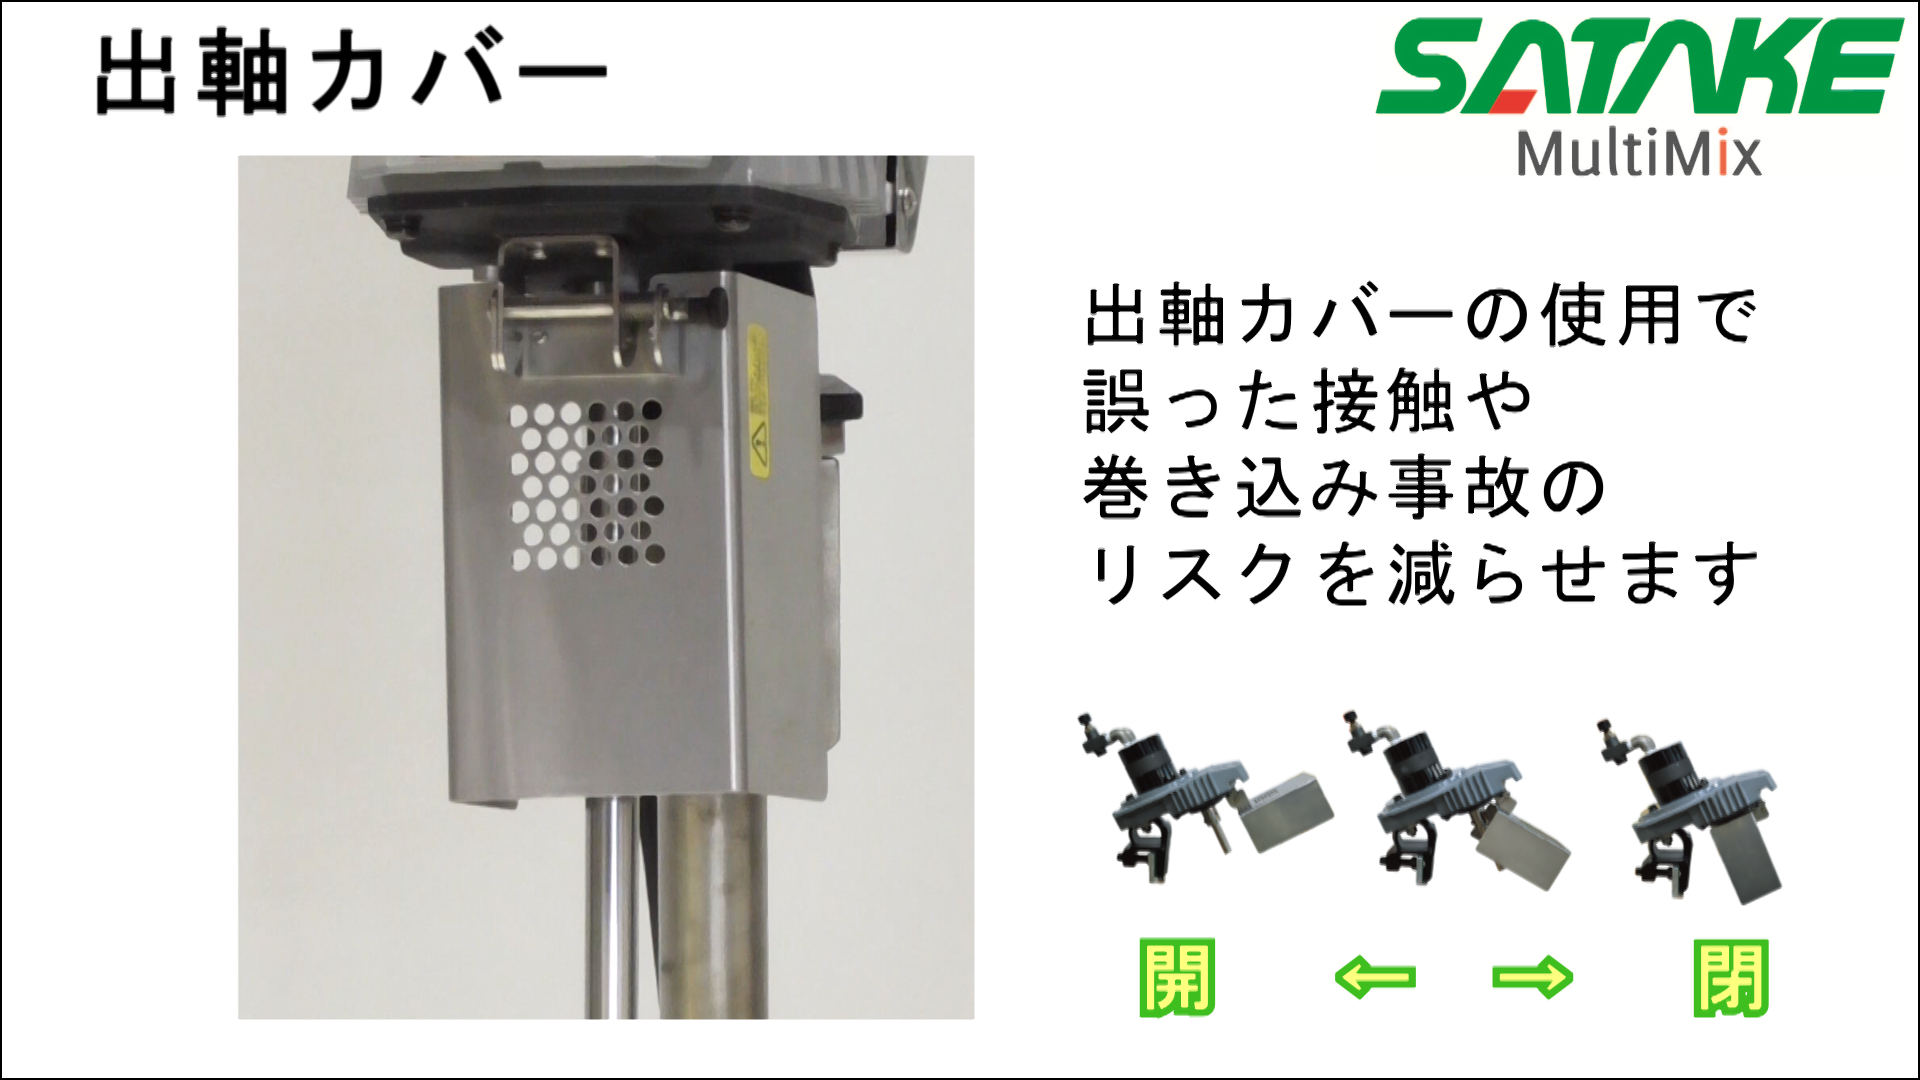 Outer shaft cover